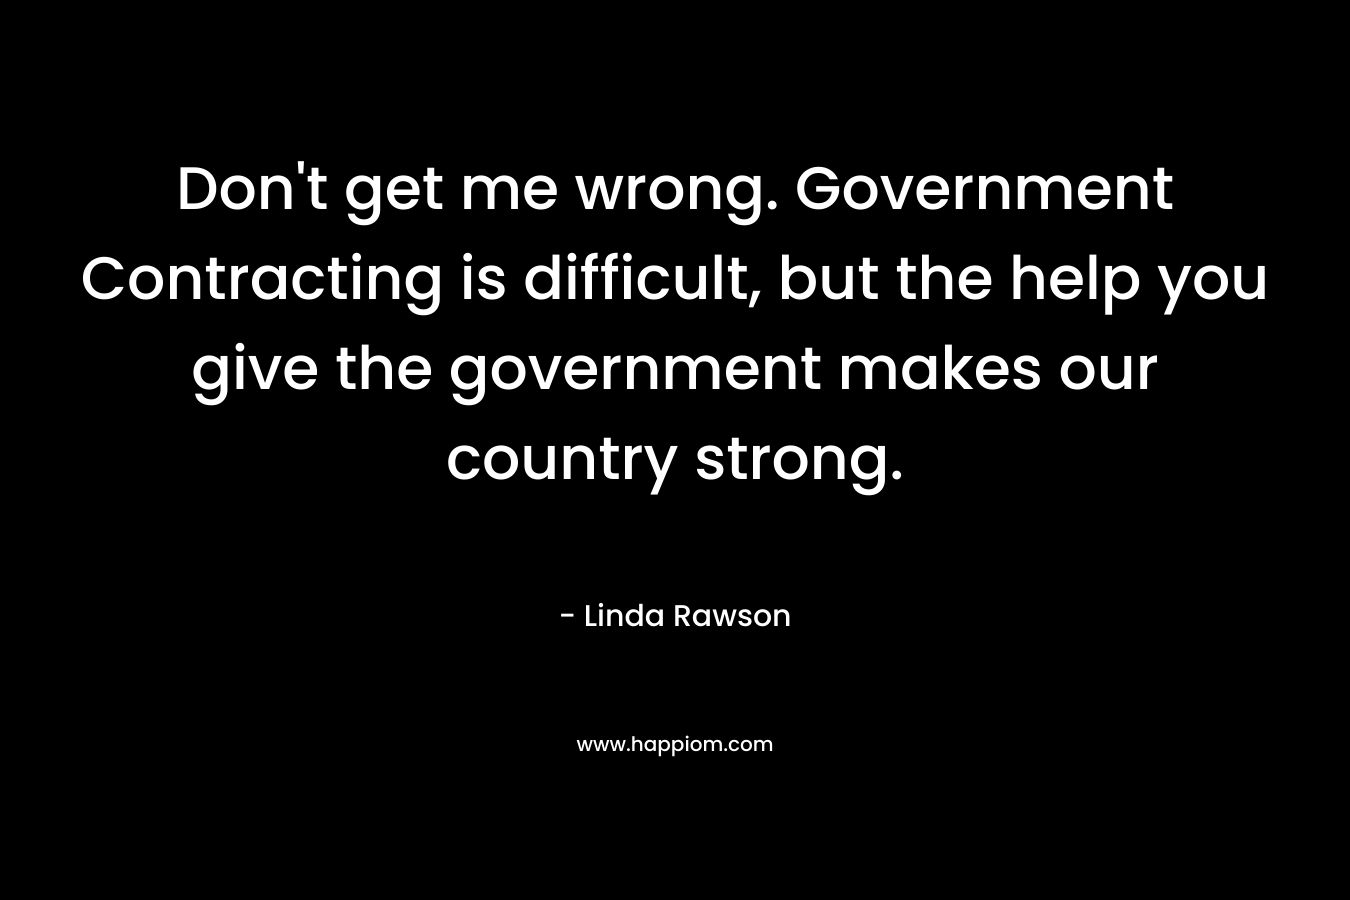 Don't get me wrong. Government Contracting is difficult, but the help you give the government makes our country strong.